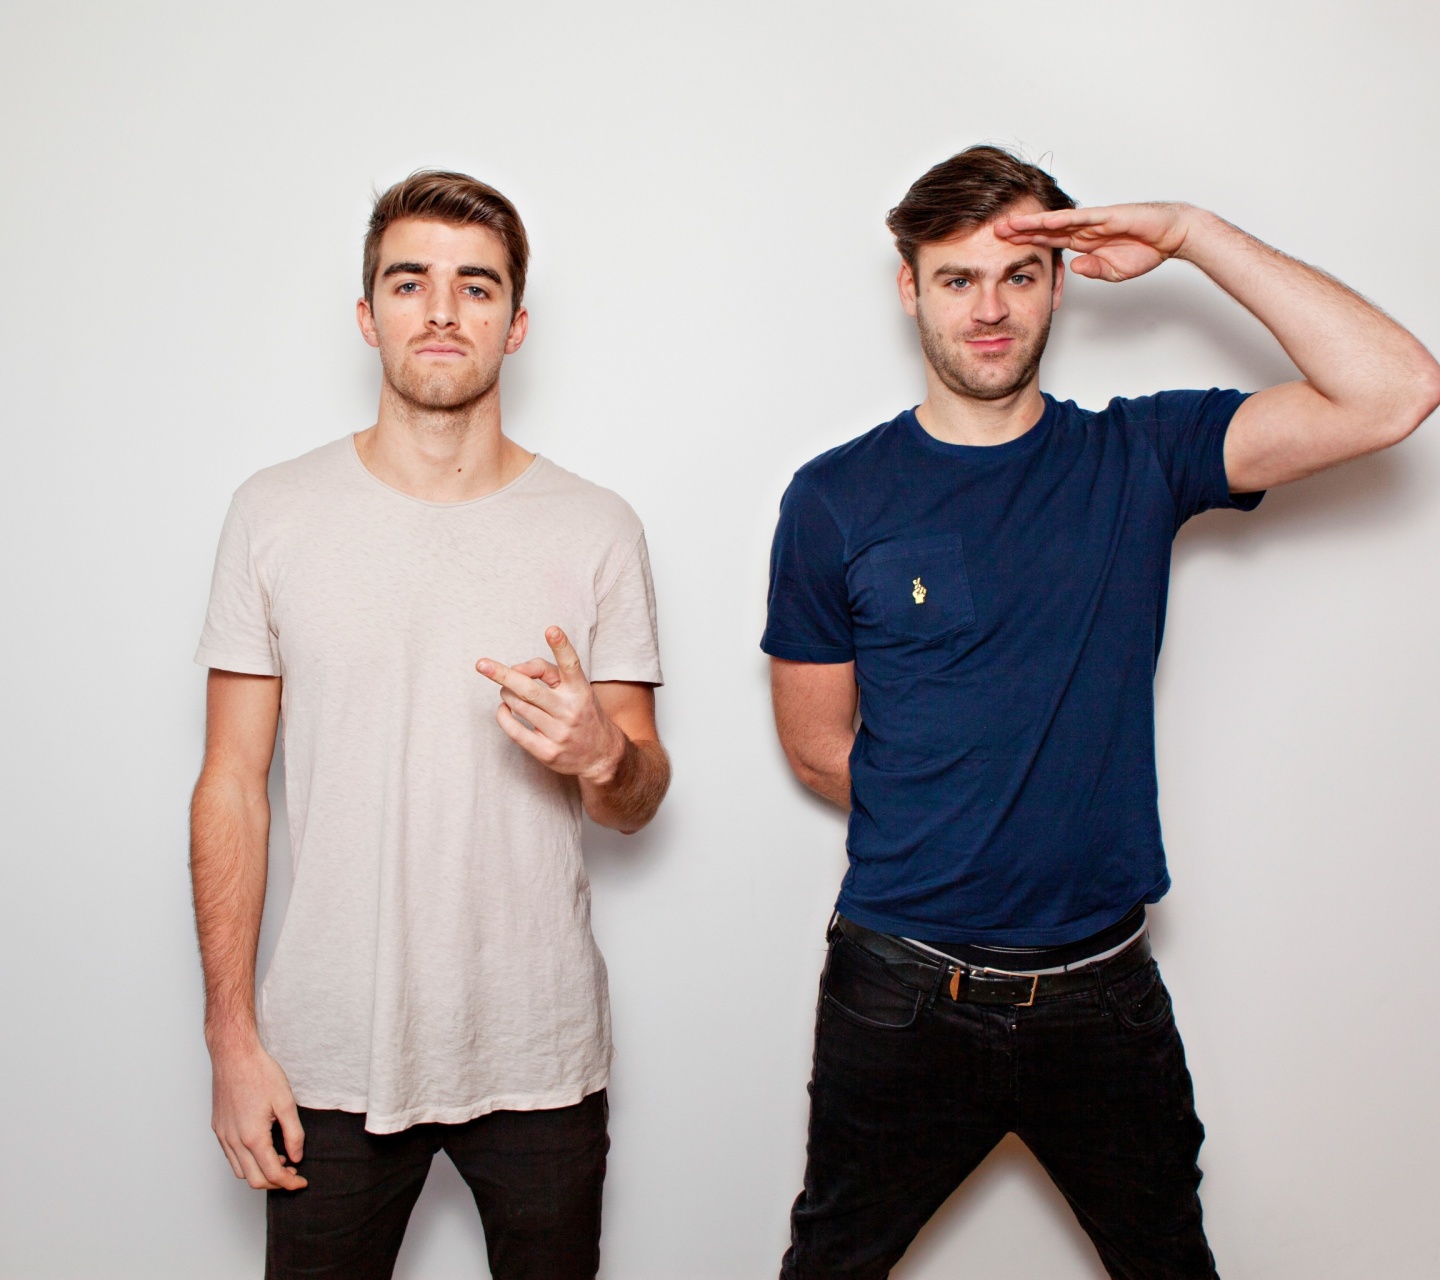 Das The Chainsmokers with Andrew Taggart and Alex Pall Wallpaper 1440x1280